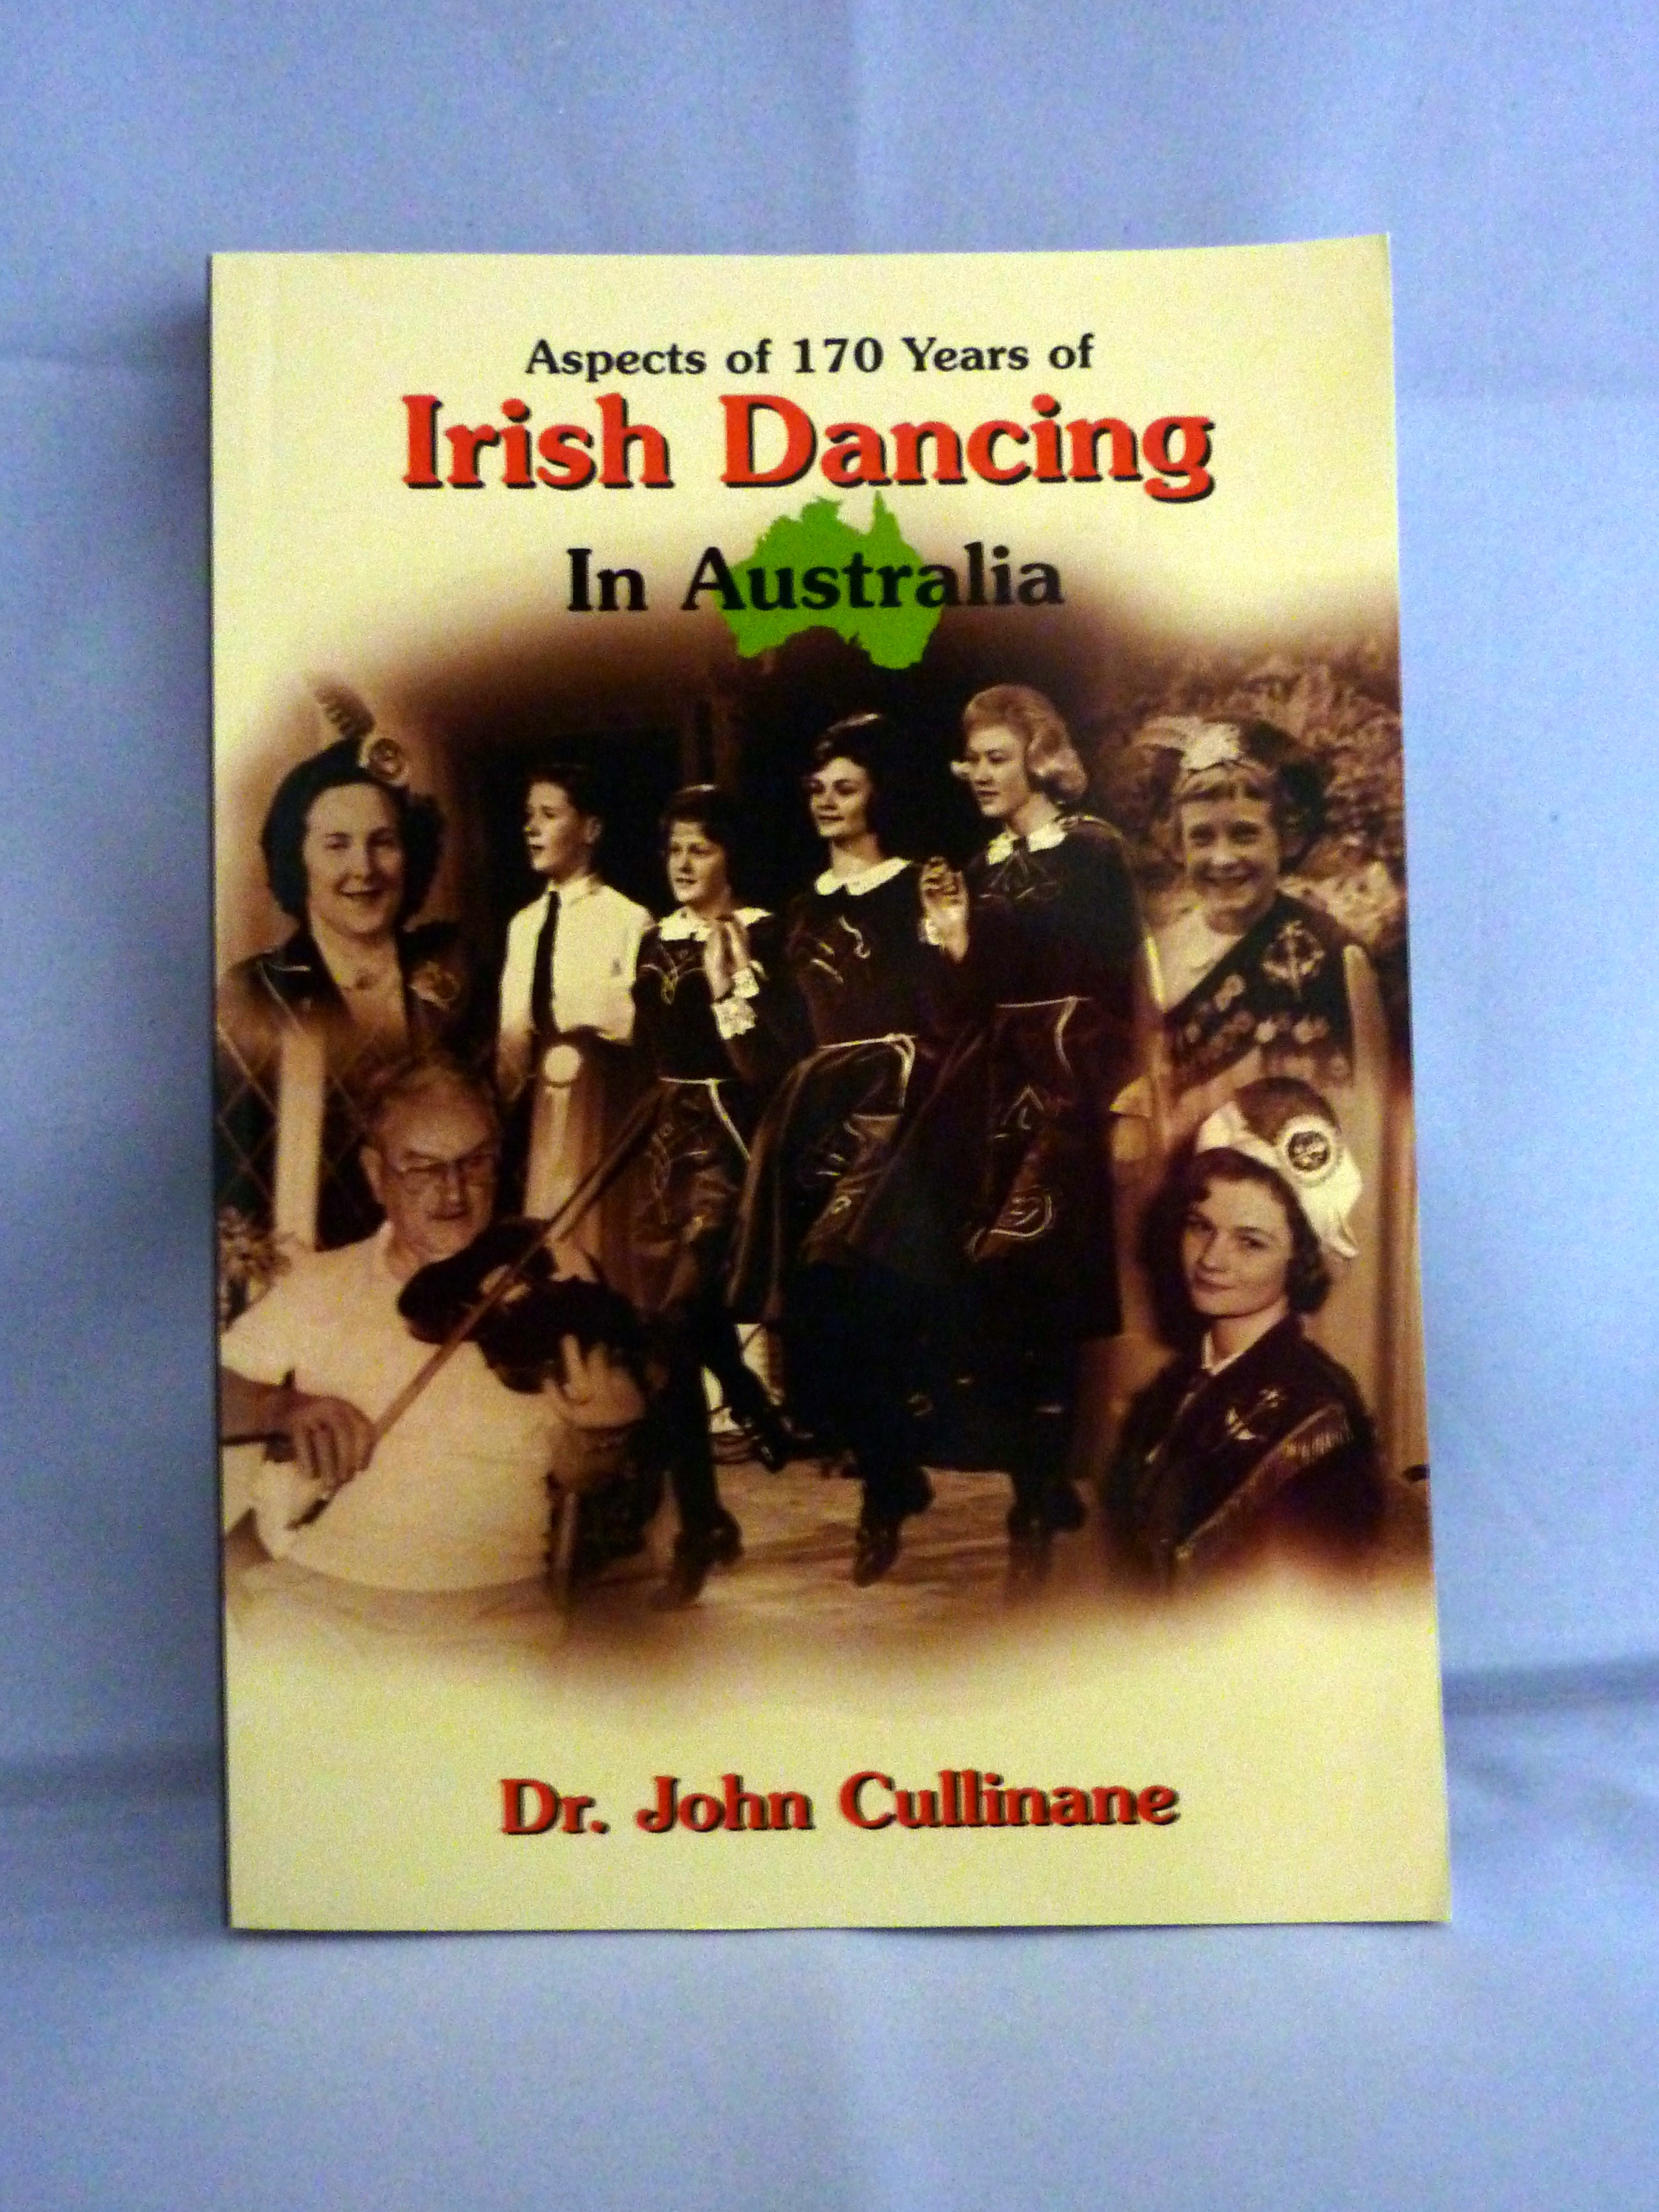 Dance Books - signed by the author Dr. John Cullinane ADCRG